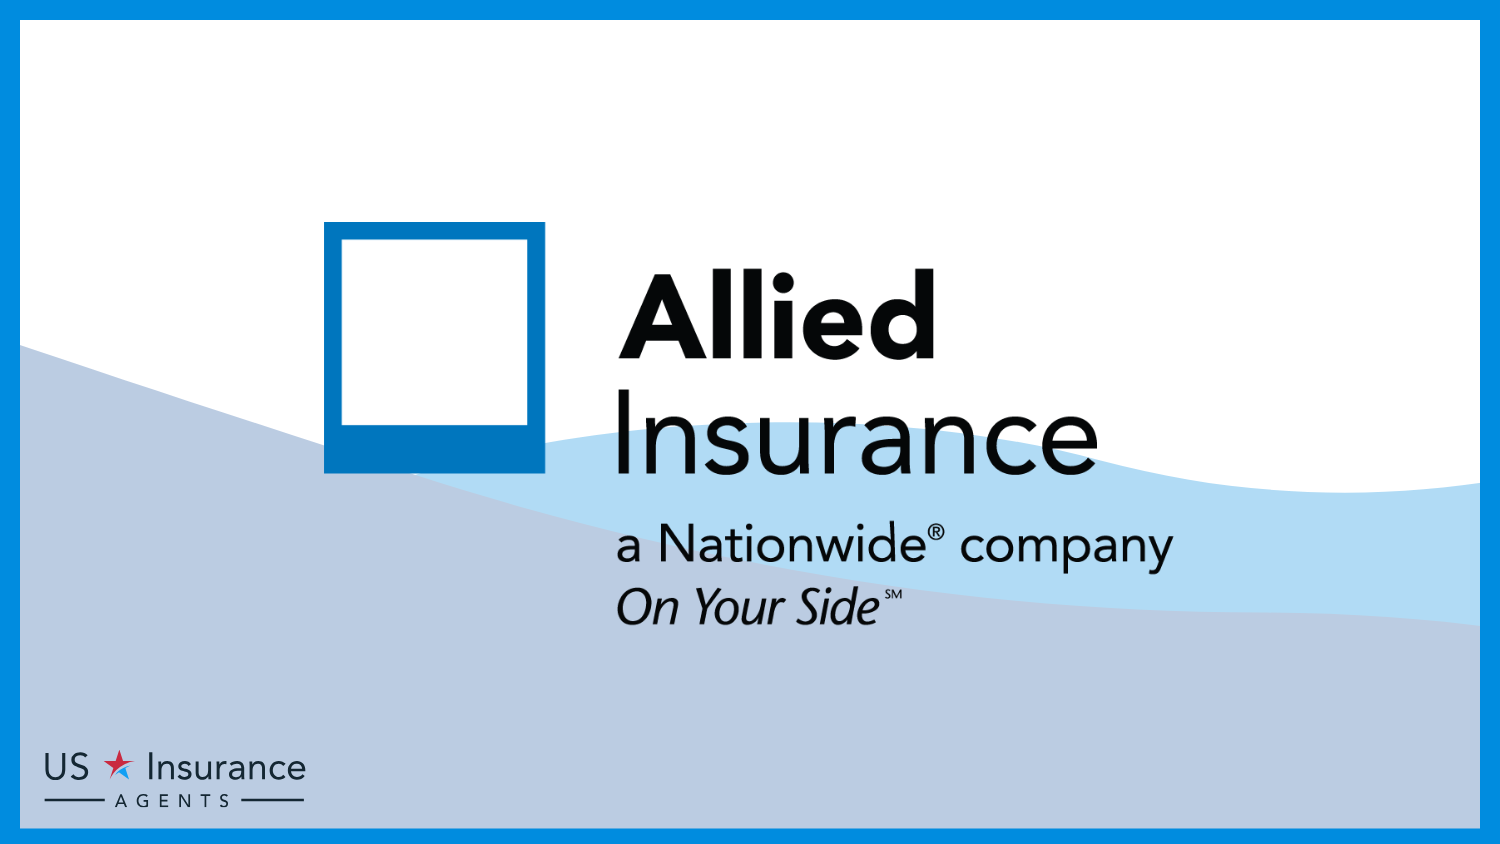 Allied Insurance: Best Business Insurance for Assisted Living Facilities